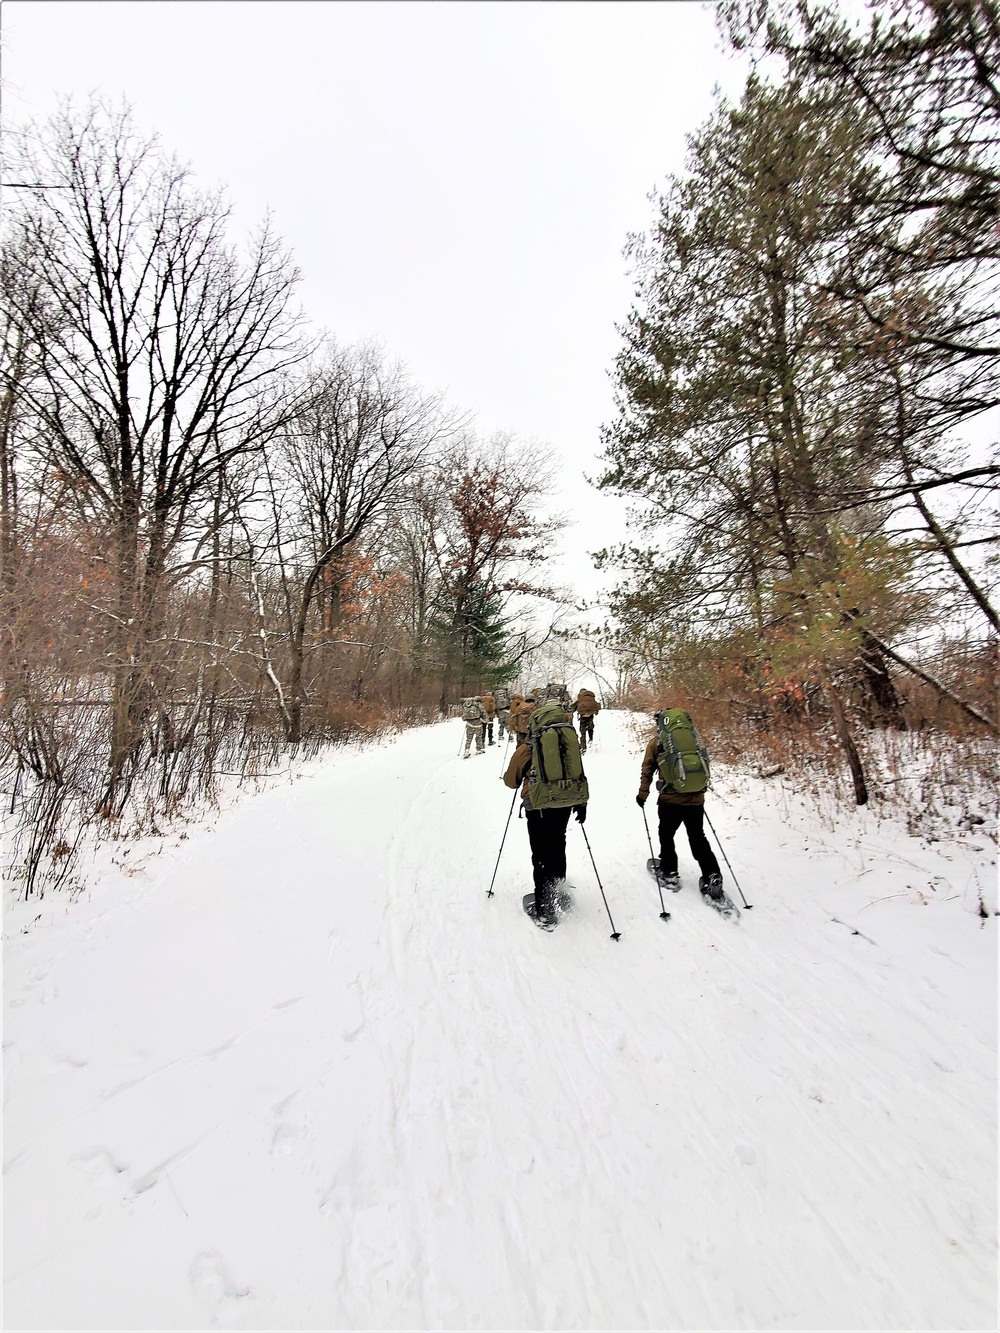 Cold-Weather Operations Course students learn snowshoeing techniques at Fort McCoy